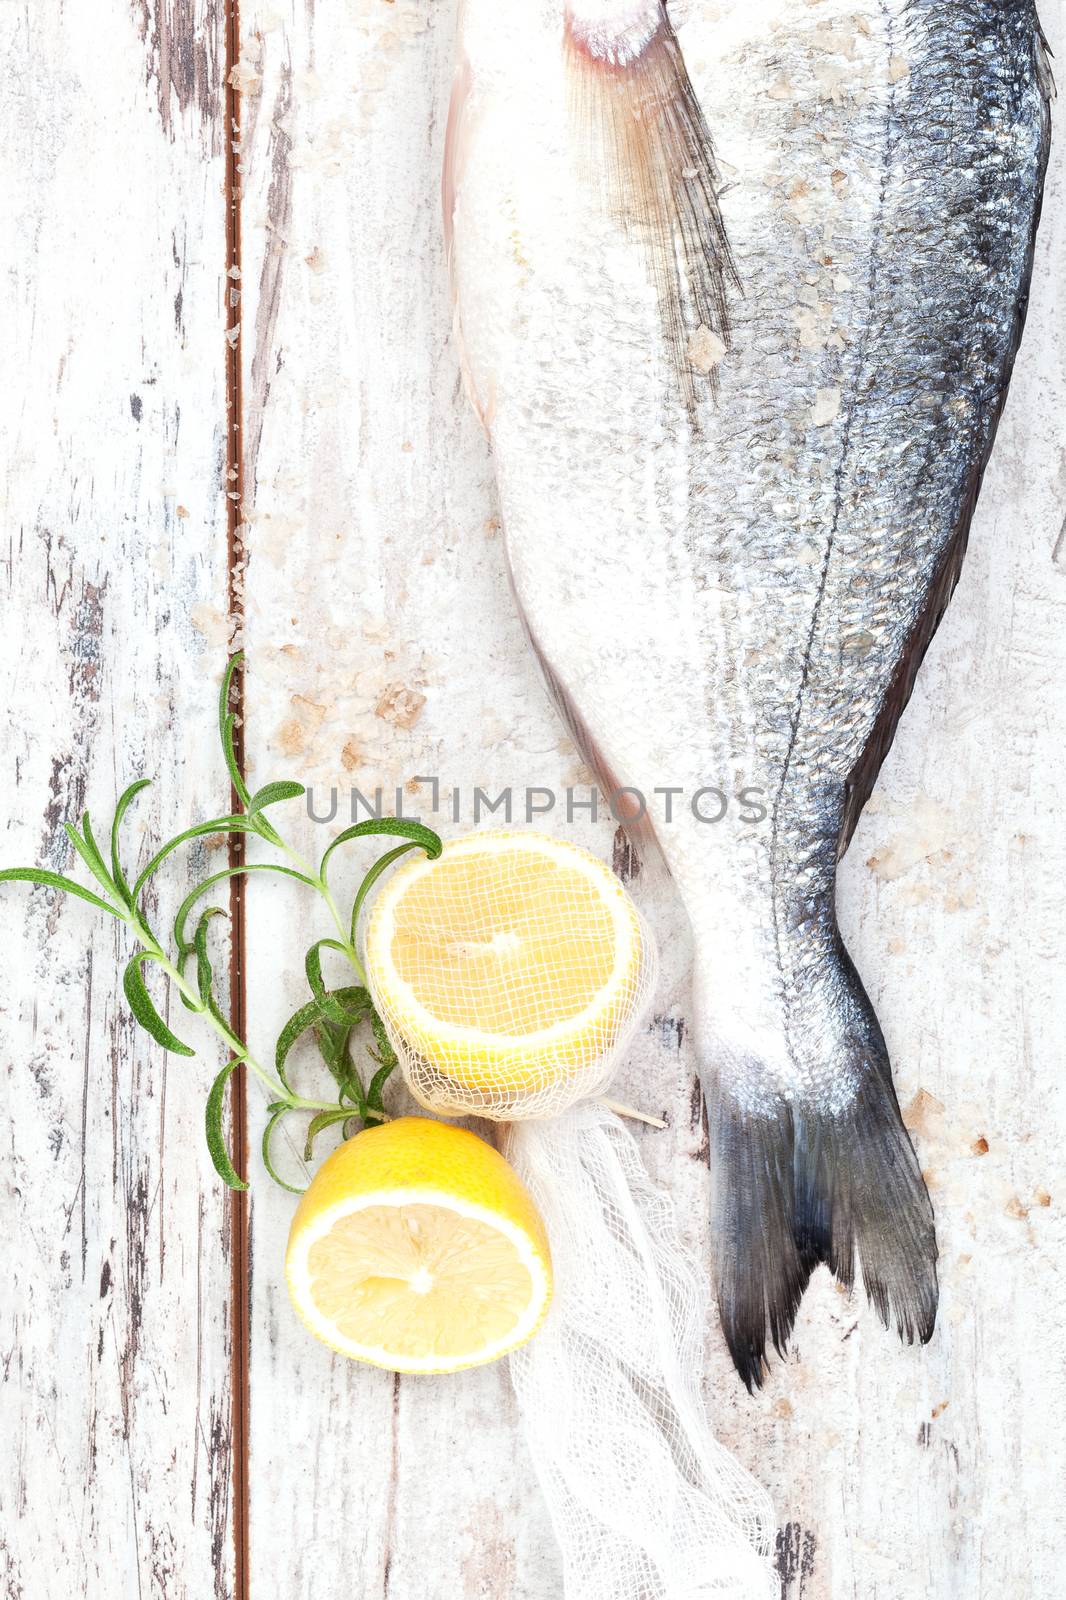 Luxurious seafood concept. Fish tail with lemon and fresh herbs and salt crystals on white wooden background with texture, top view.